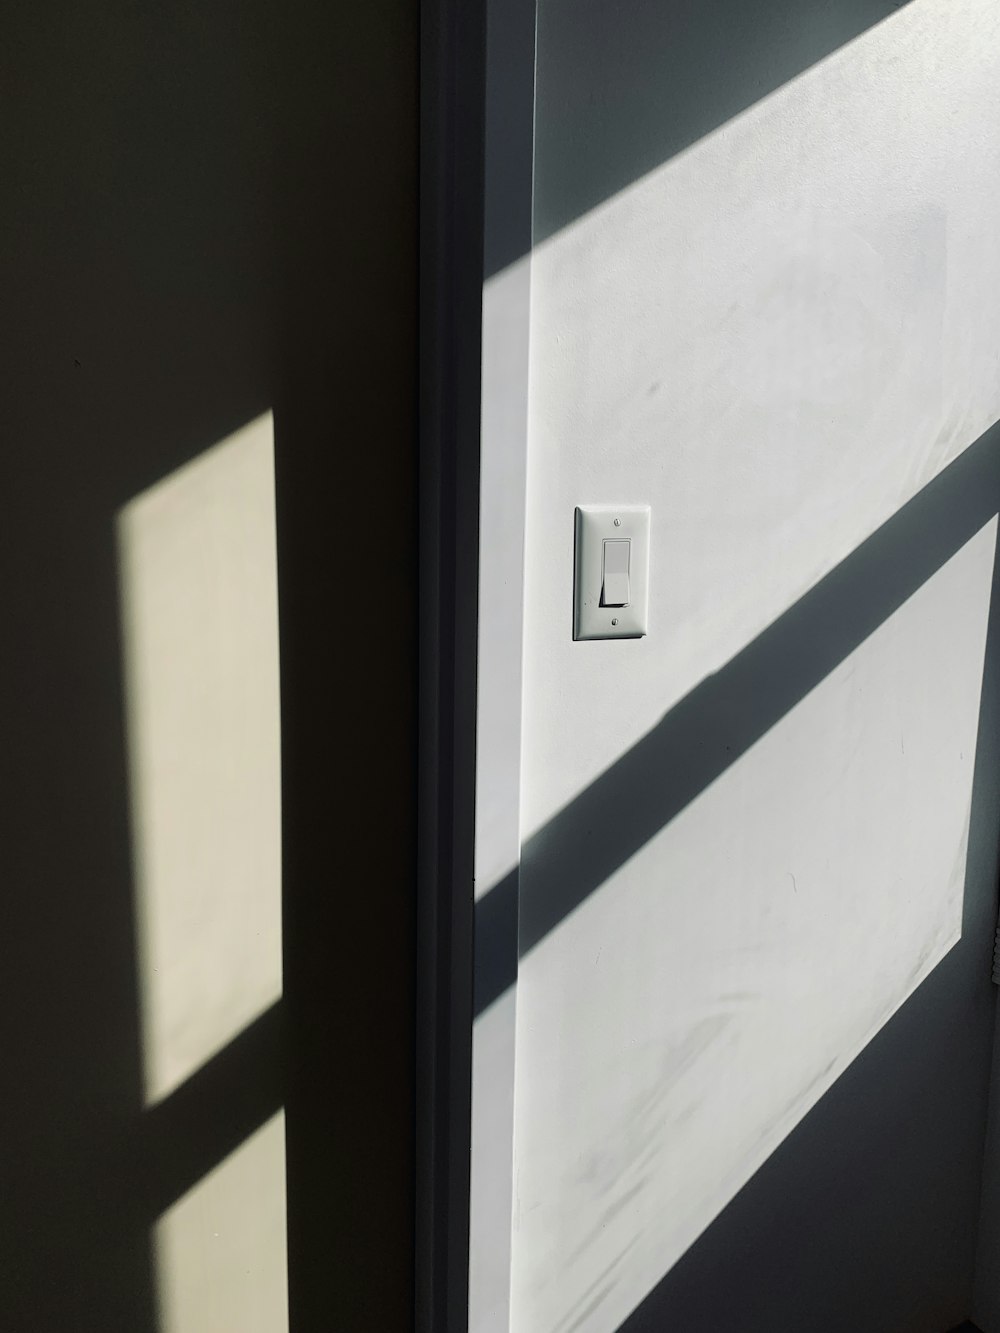 white wall switch besides door jamb